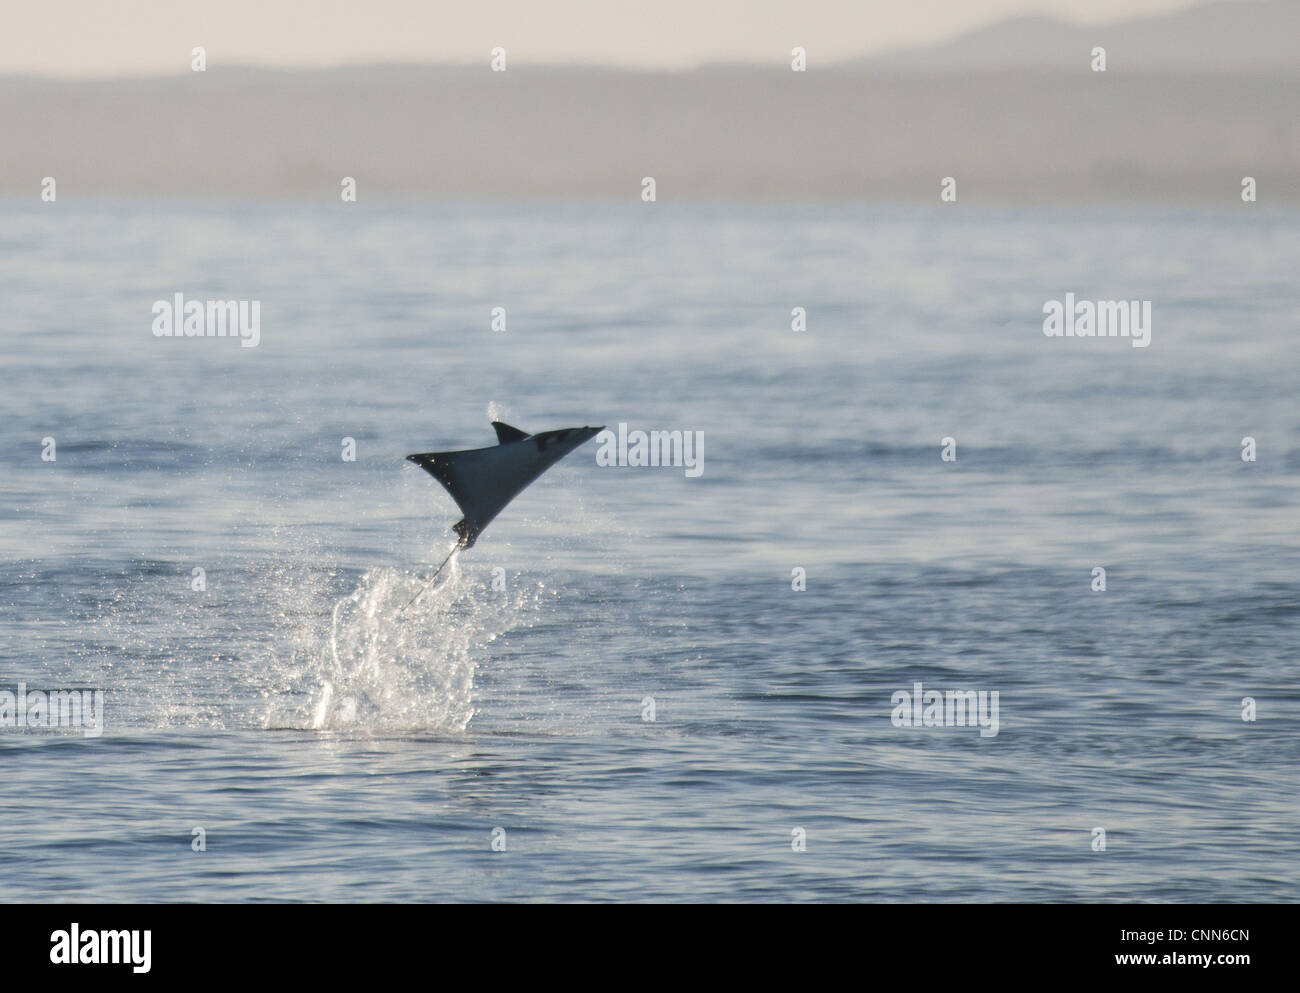 Mobula Ray (Mobula sp.) adult, leaping from water at dusk, Sea of Cortes, Los Barriles Baja California Sur, Mexico, march Stock Photo